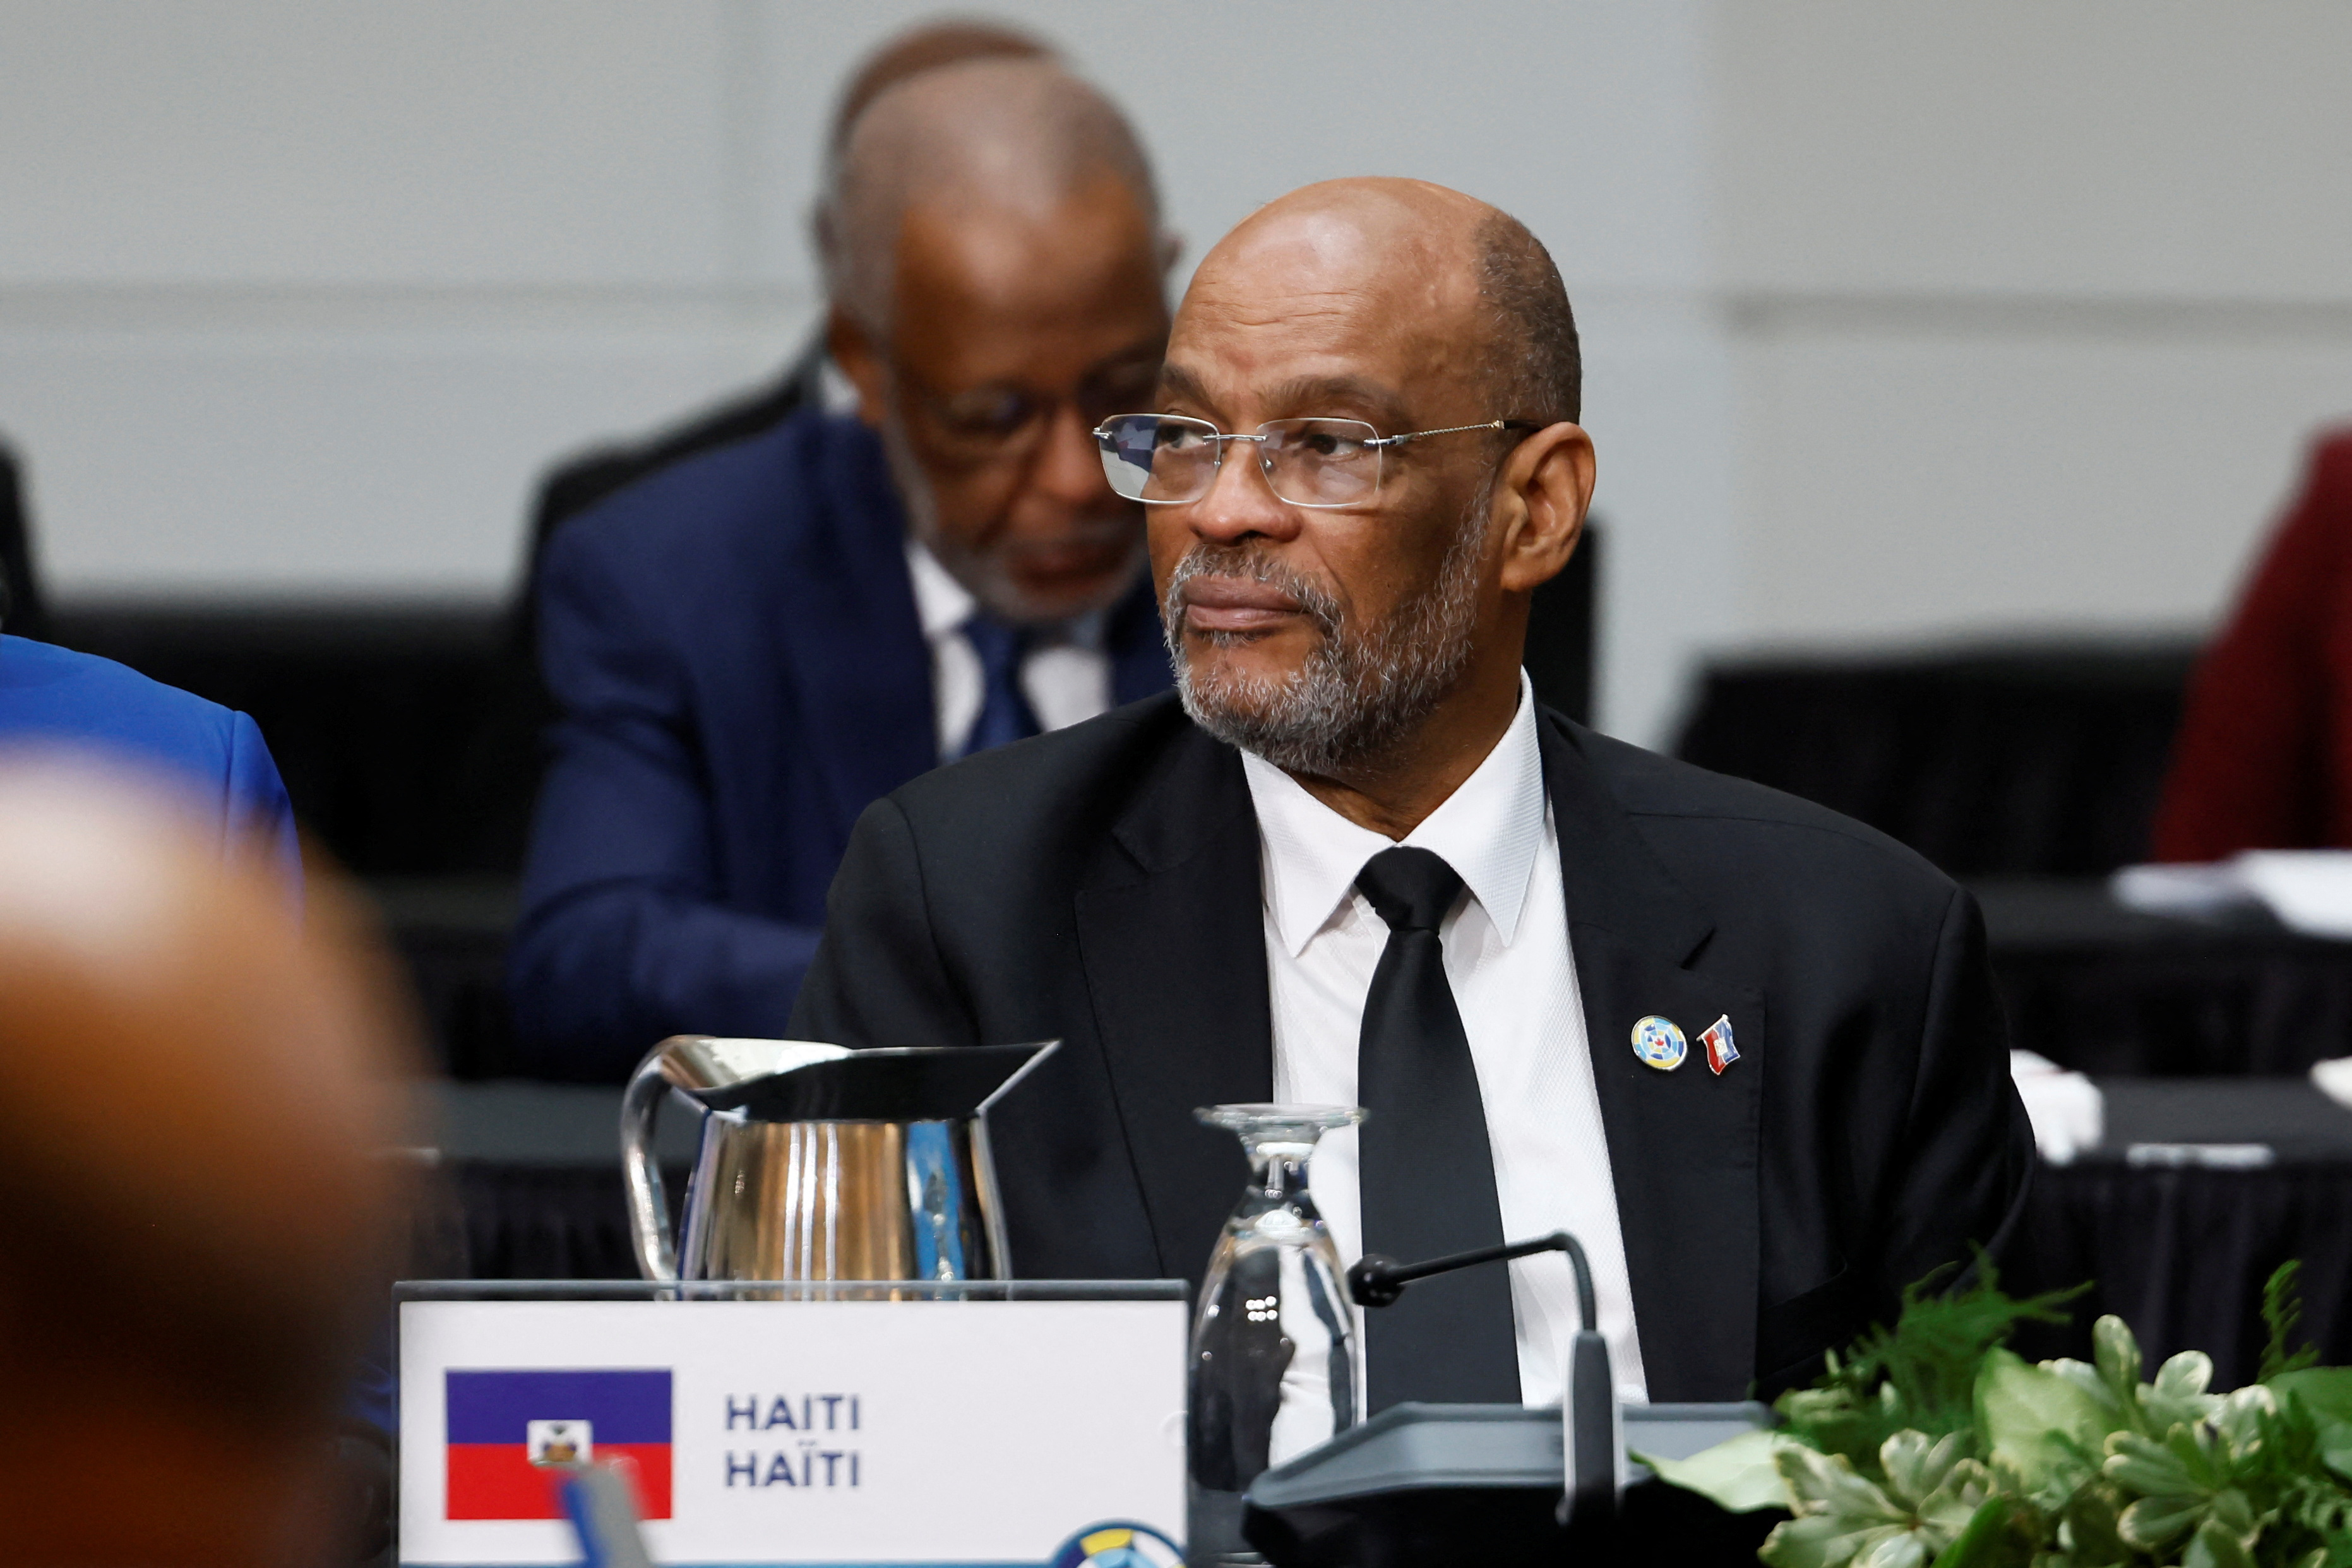 Haiti's Prime Minister Ariel Henry takes part in the Canada-CARICOM Summit in Ottawa